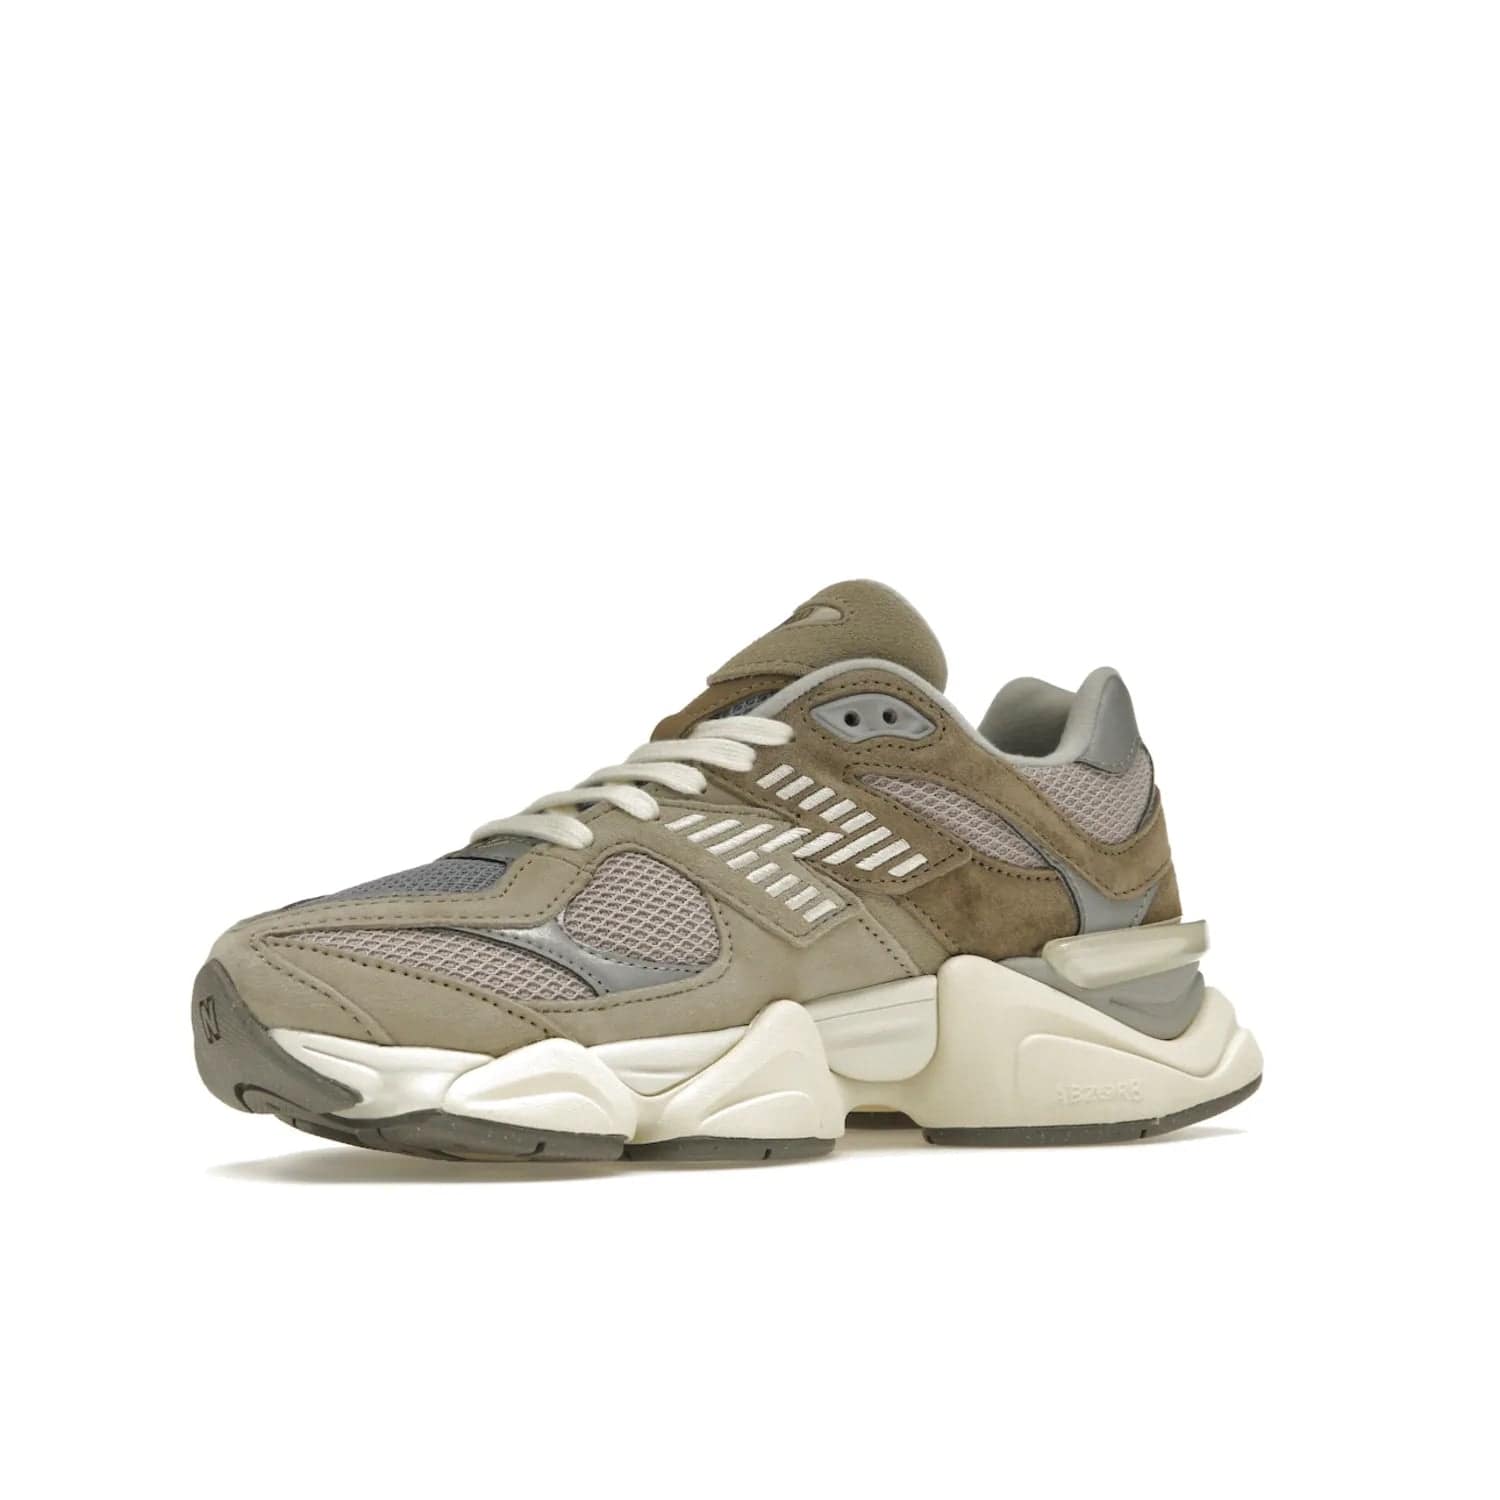 New Balance 9060 Mushroom - Image 16 - Only at www.BallersClubKickz.com - Get the New Balance 9060 Mushroom in stylish aluminum and mushroom tones. Featuring a porous mesh fabric with multiple suede overlays, a grey N symbol and rugged off-white/grey sole. Shop now and make a statement.